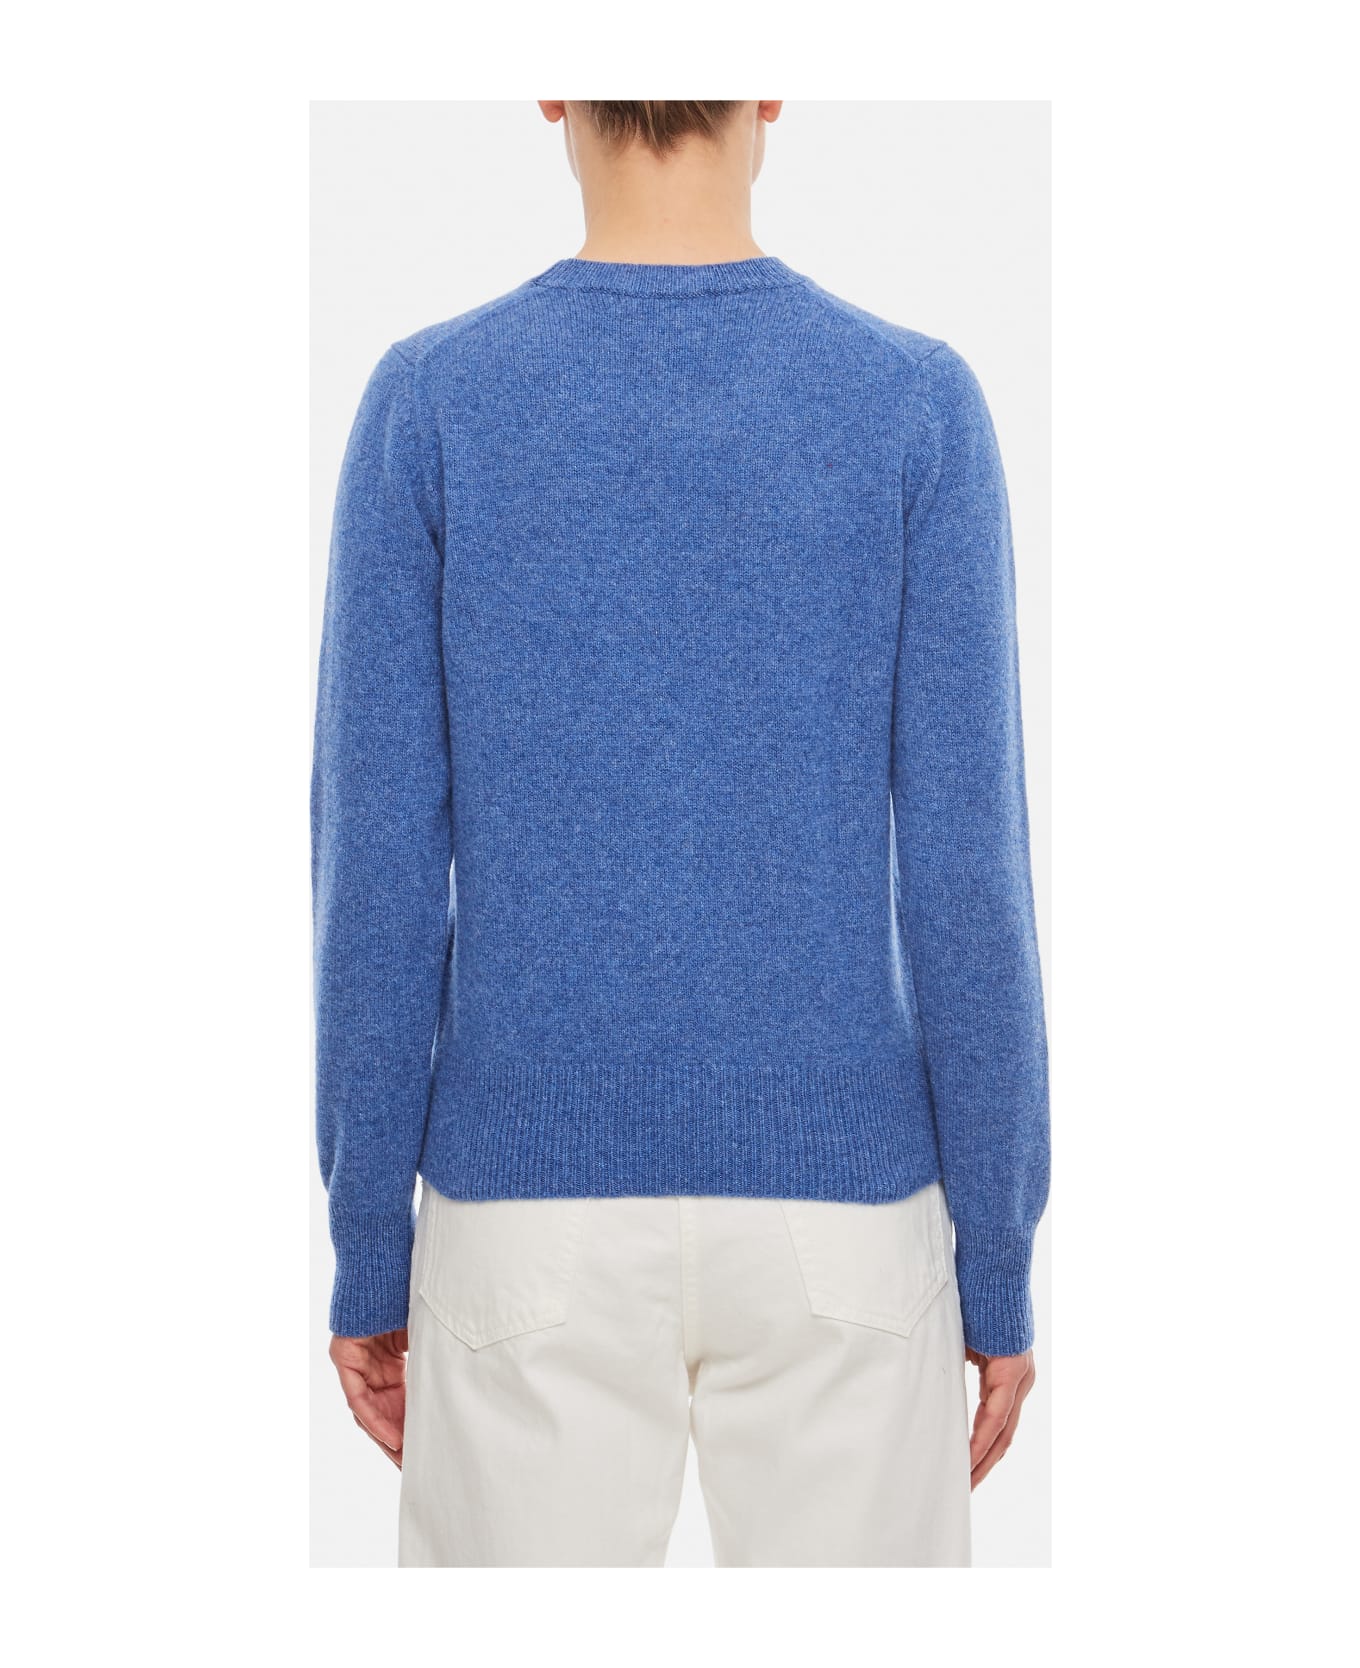 Molly Goddard Simone Cashmere Blend Sweater - Clear Blue